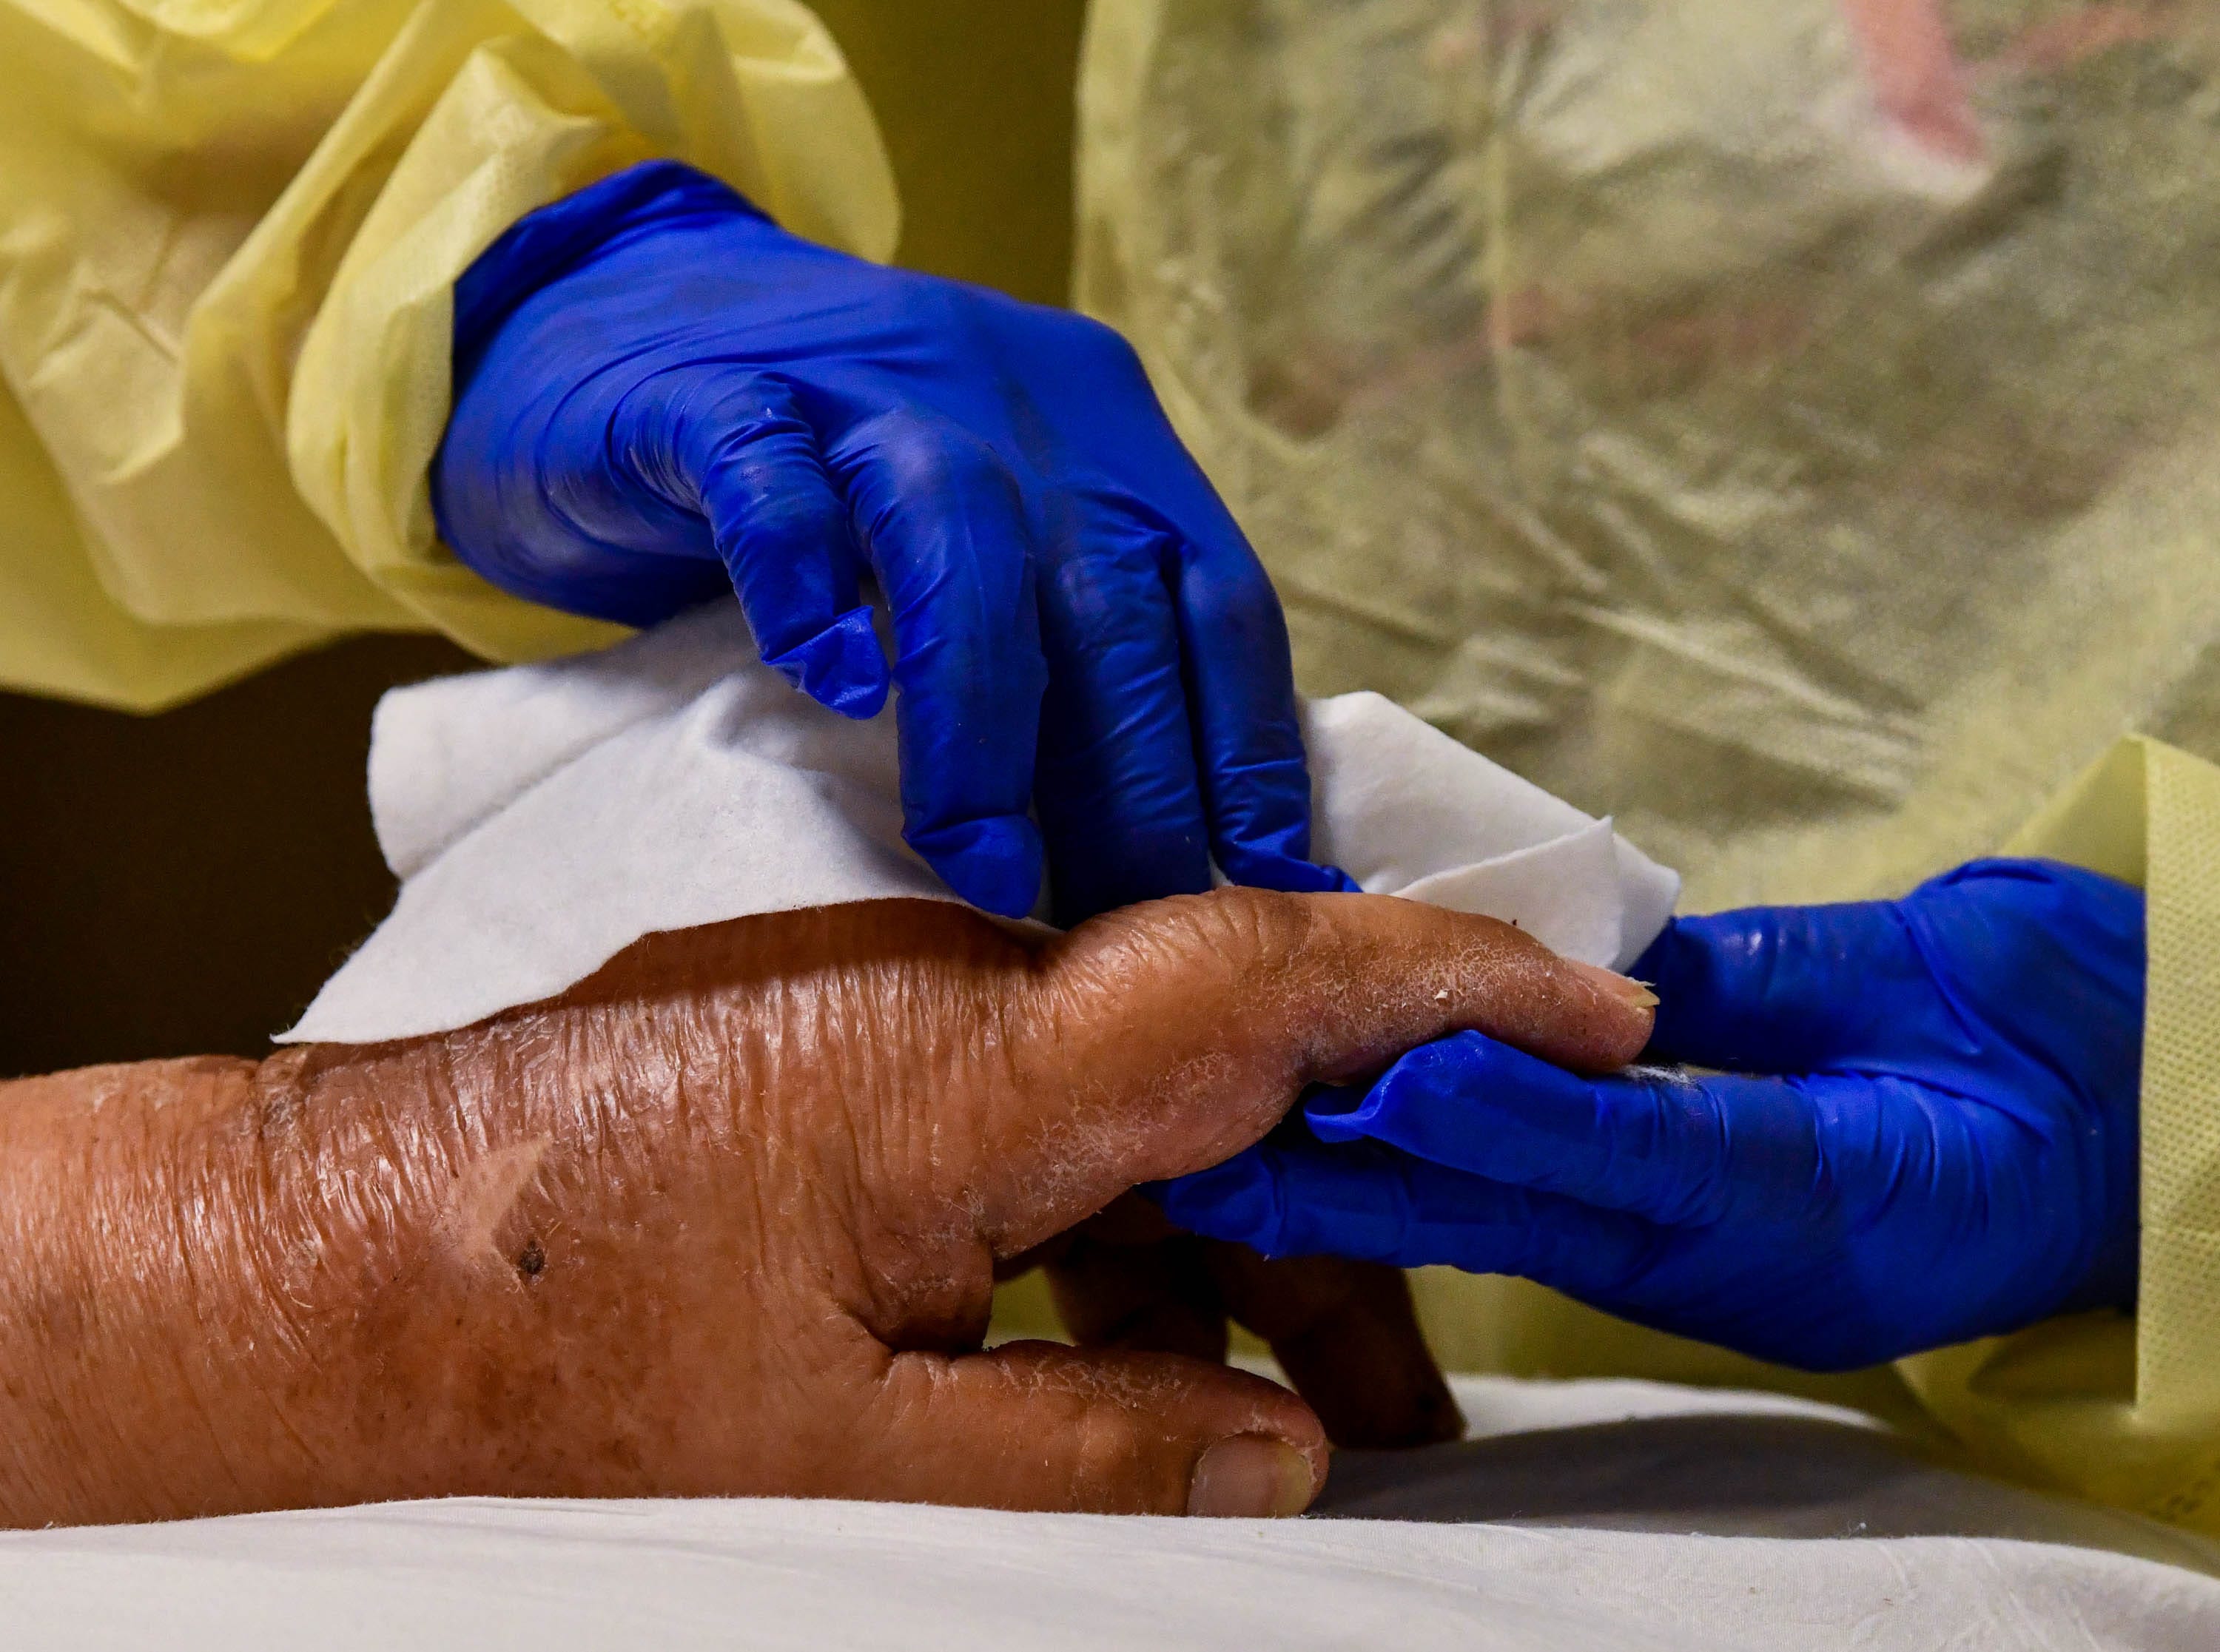 A nurse wipes down a COVID-19 patient's hand on Tuesday, Feb. 9, 2021, at Providence Holy Cross Medical Center in Los Angeles.